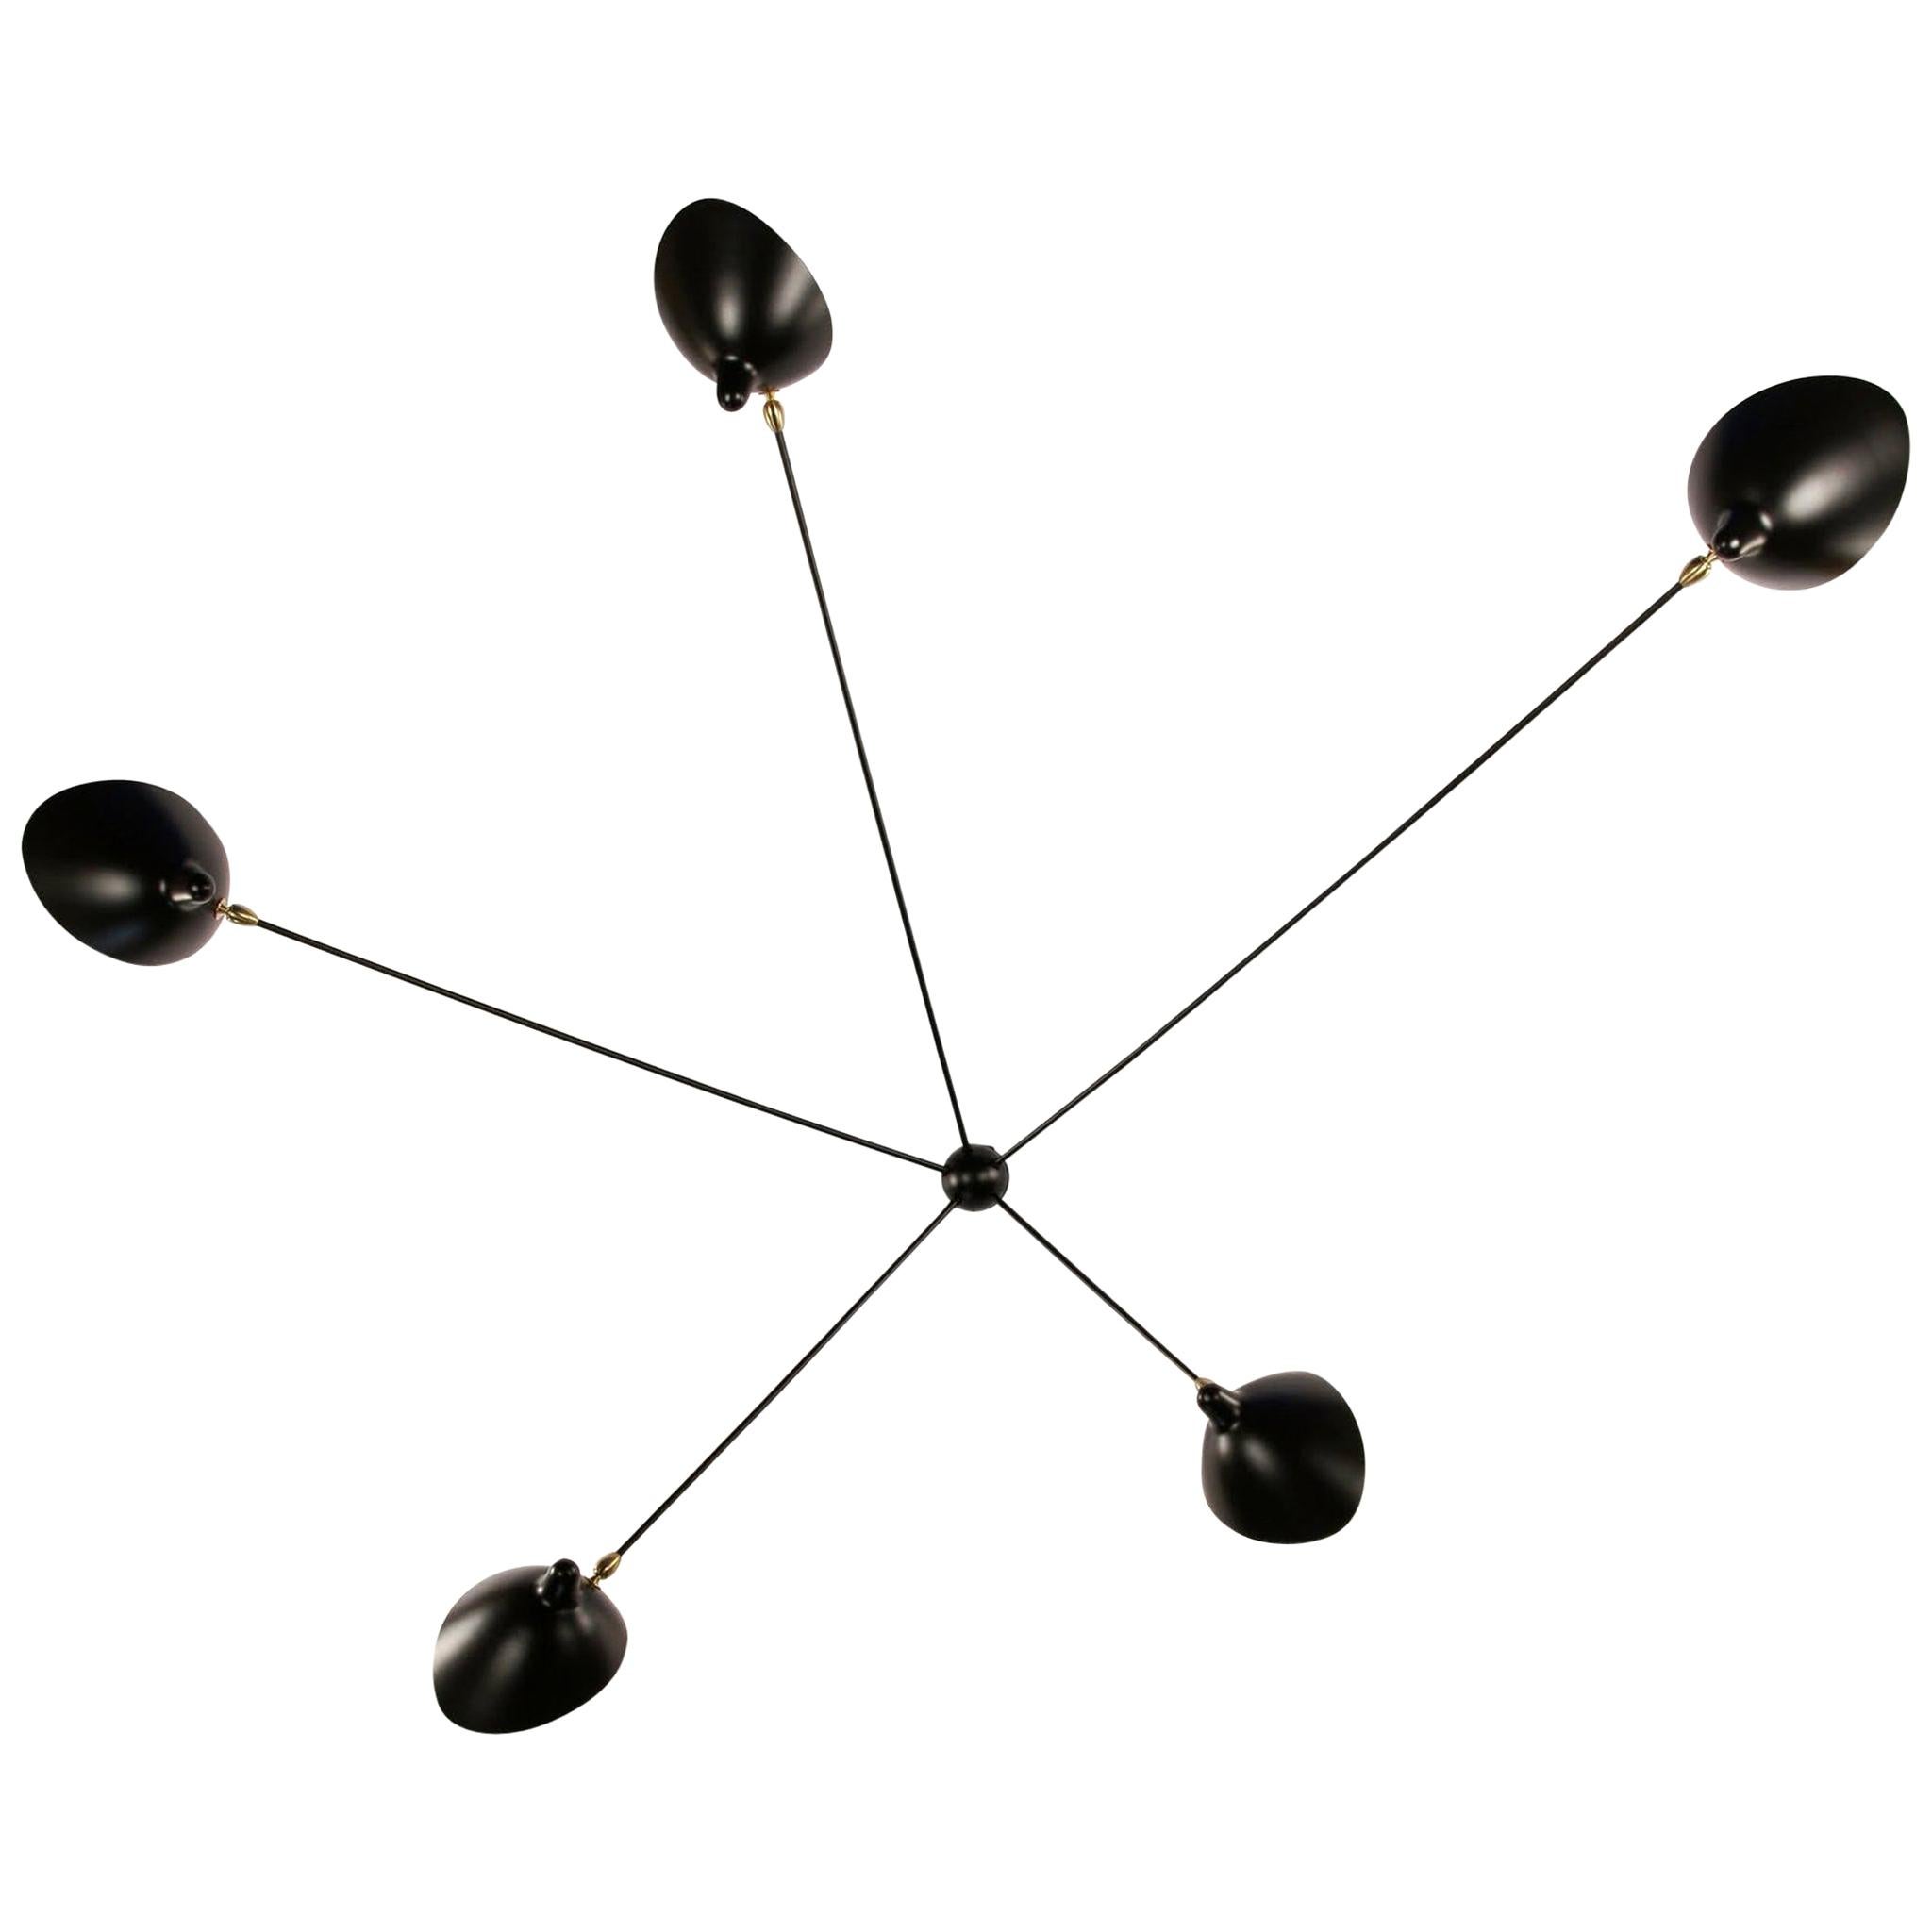 Sconce Lamp Serge Mouille Model "Applique Spider 5 Arms" in Black or White